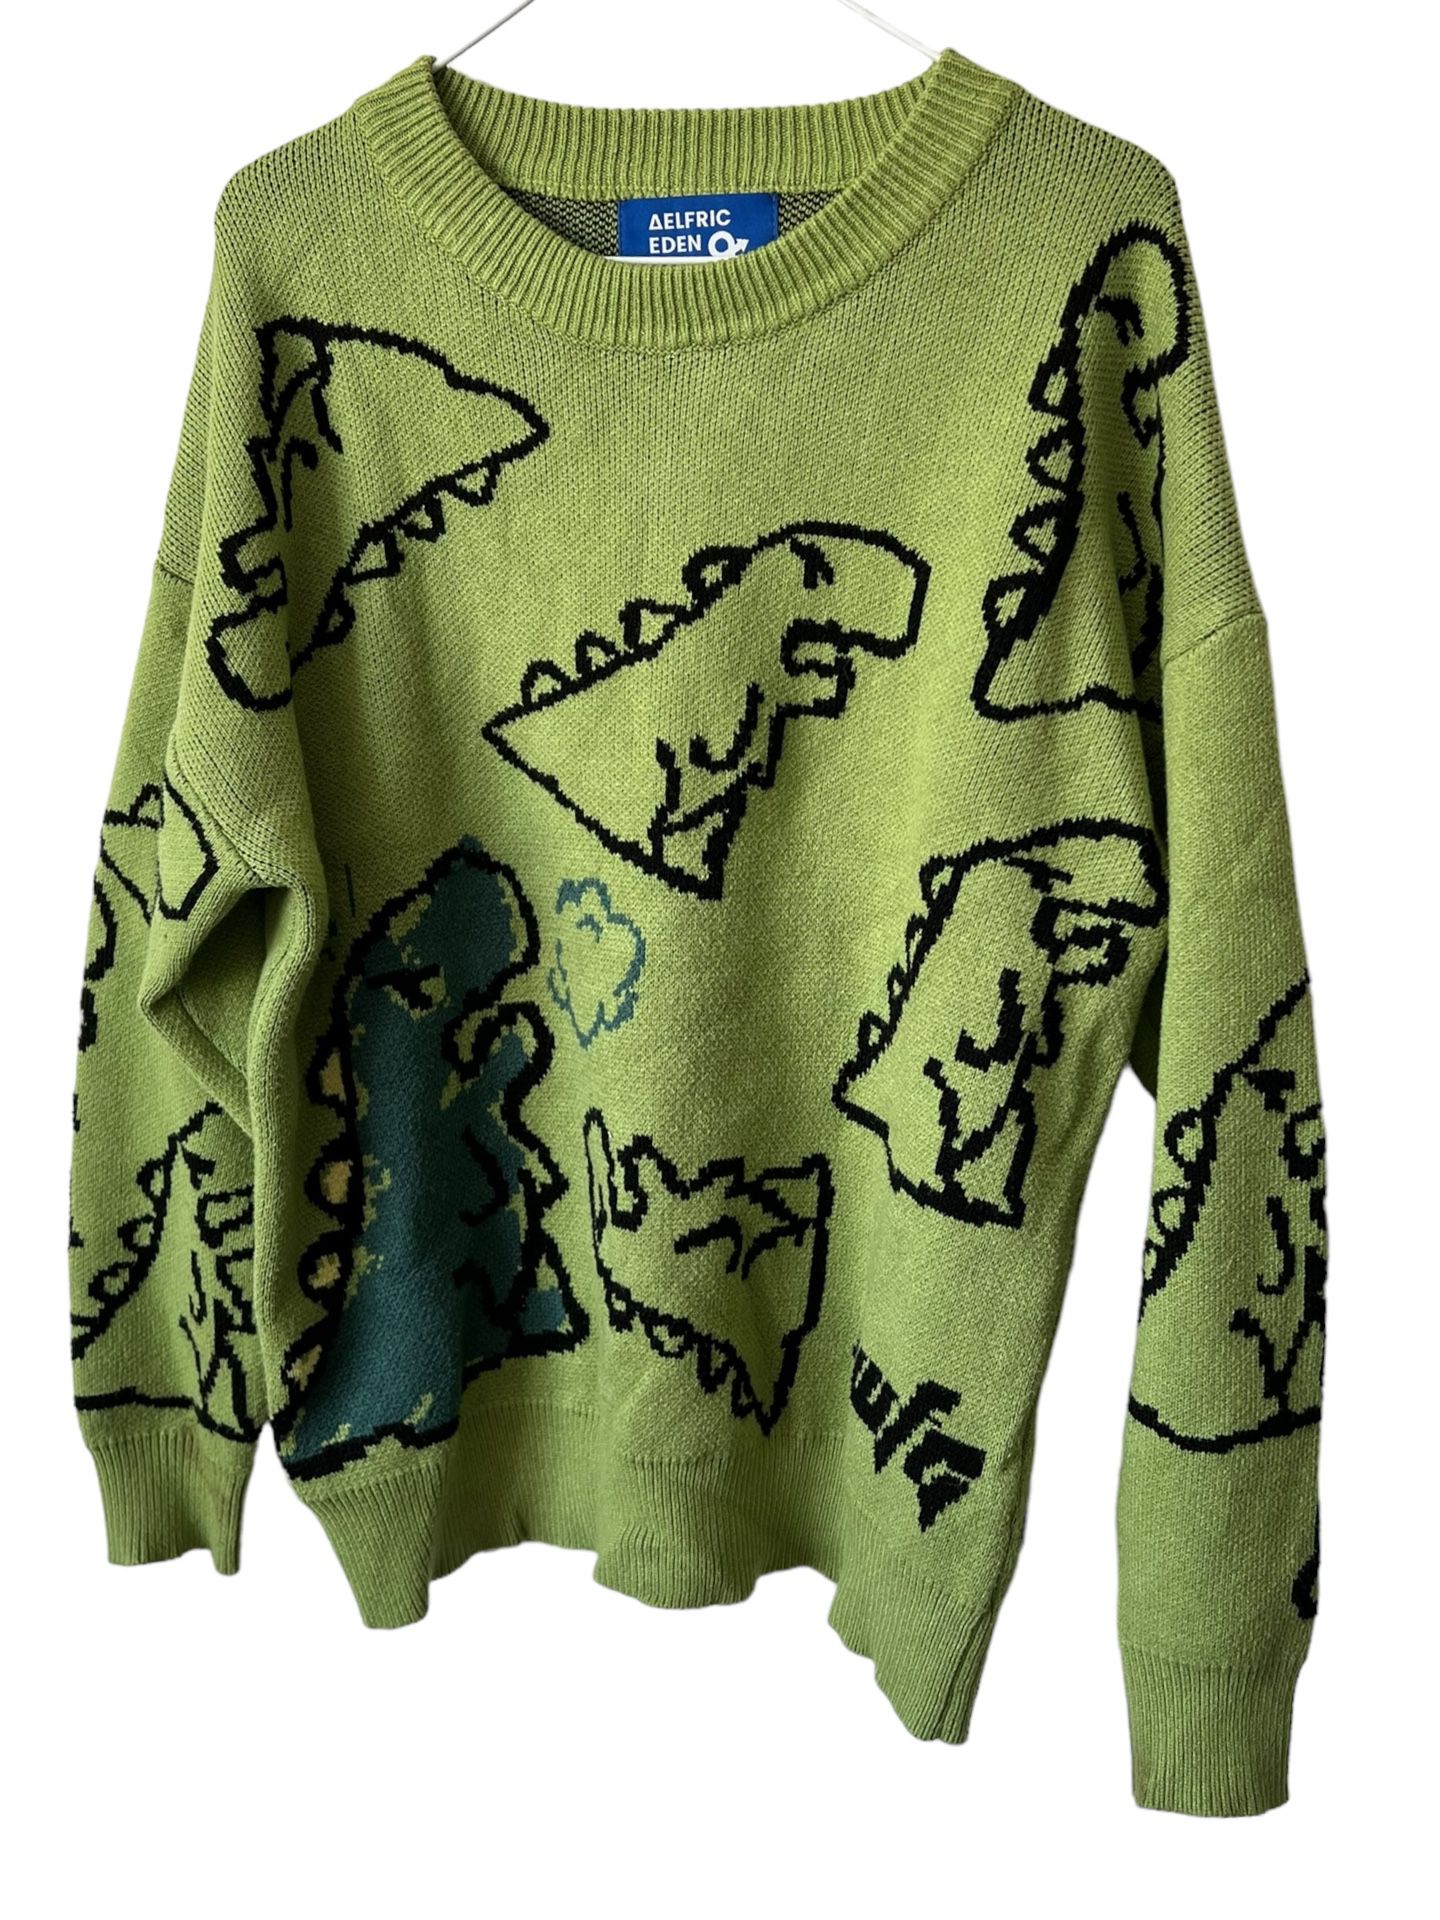 Aelfric Eden Sweater Mens M Green Black Graphic Cartoon AOP Dinosaur Acrylic?  Measurements are in pictures. Comes from a pet and smoke free home.Elev